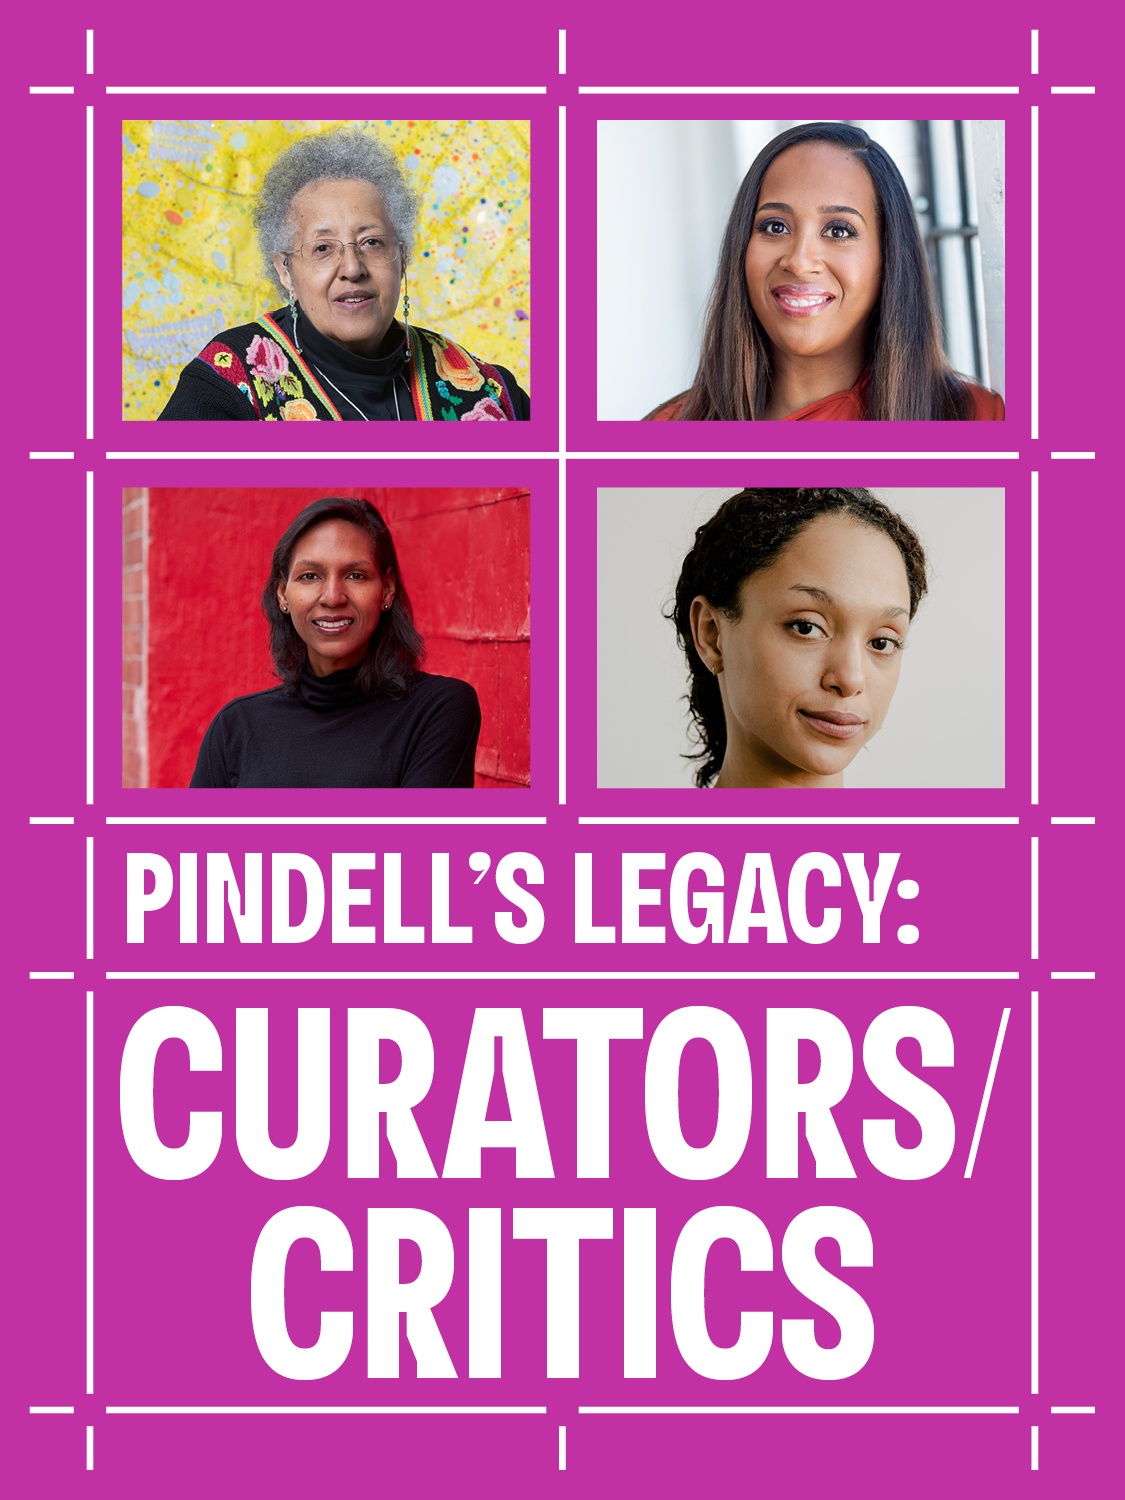 A white grid pattern on a pink background enclosing square photos of the participants in Pindell's Legacy: Curators/Critics, Clockwise from top left: Howardena Pindell, Naima J. Keith, Legacy Russell, and Courtney J. Martin.